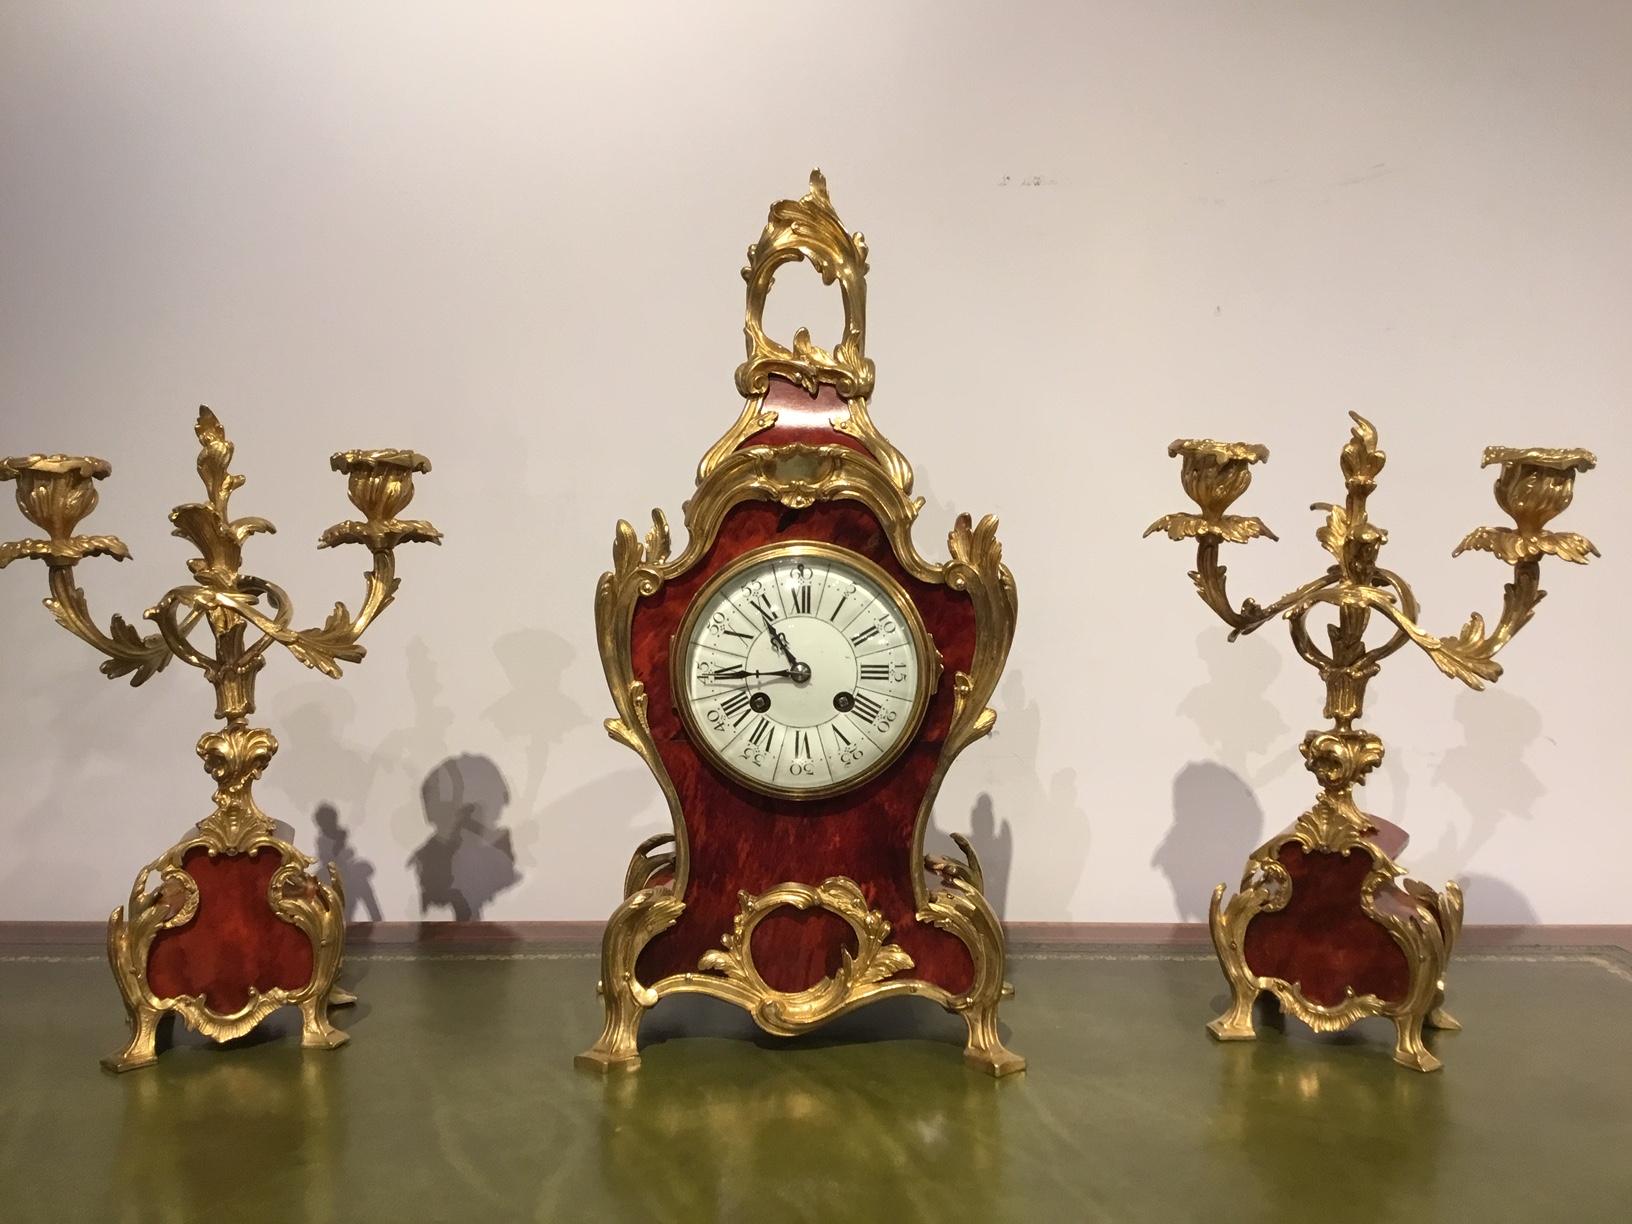 A beautiful late 19th century French tortoiseshell and ormolu clock garniture. The clock having an enameled Roman numeral dial with a typical French movement and striking a bell. Having an ormolu and tortoiseshell case with matching two branch